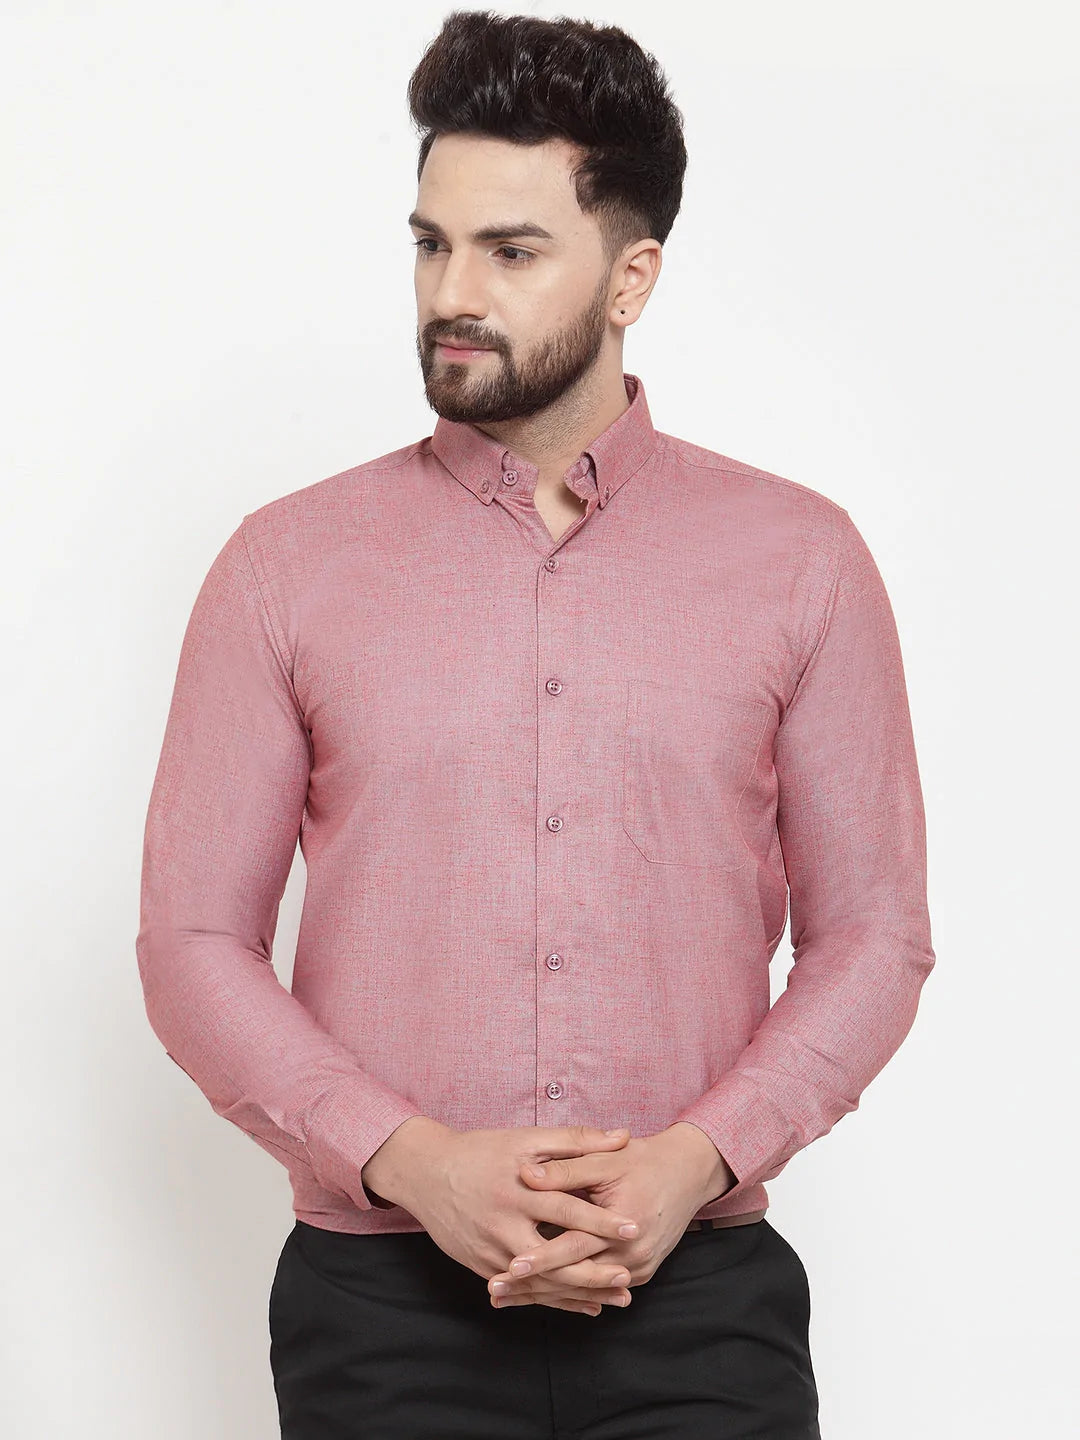 Jainish Coral Men's Cotton Solid Button Down Formal Shirts ( SF 753Coral )